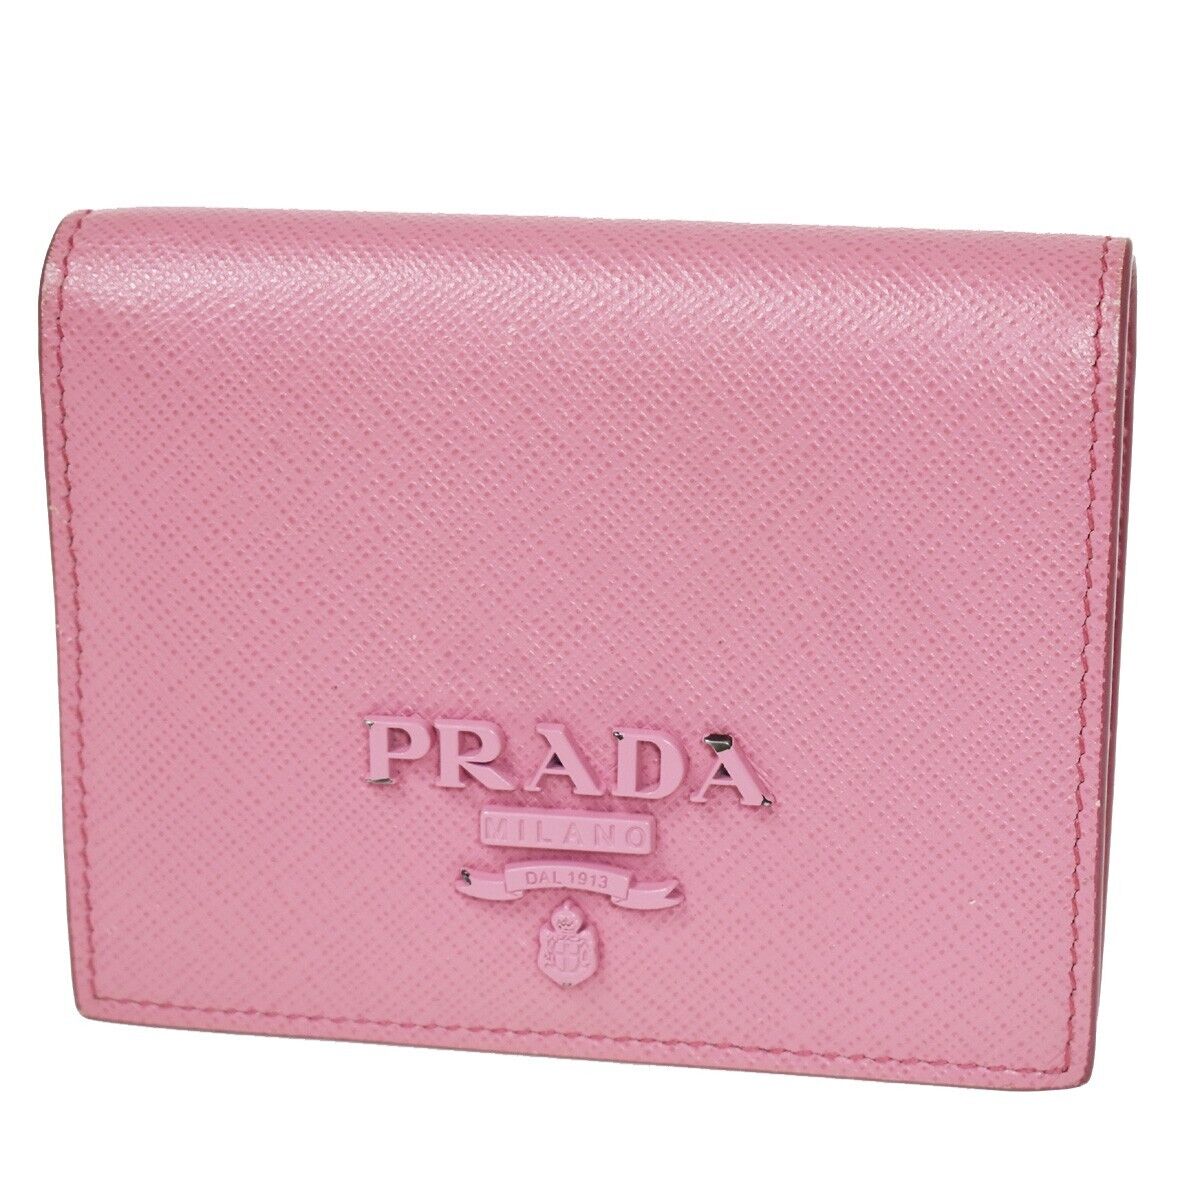 Prada Pre-owned Women's Leather Wallet